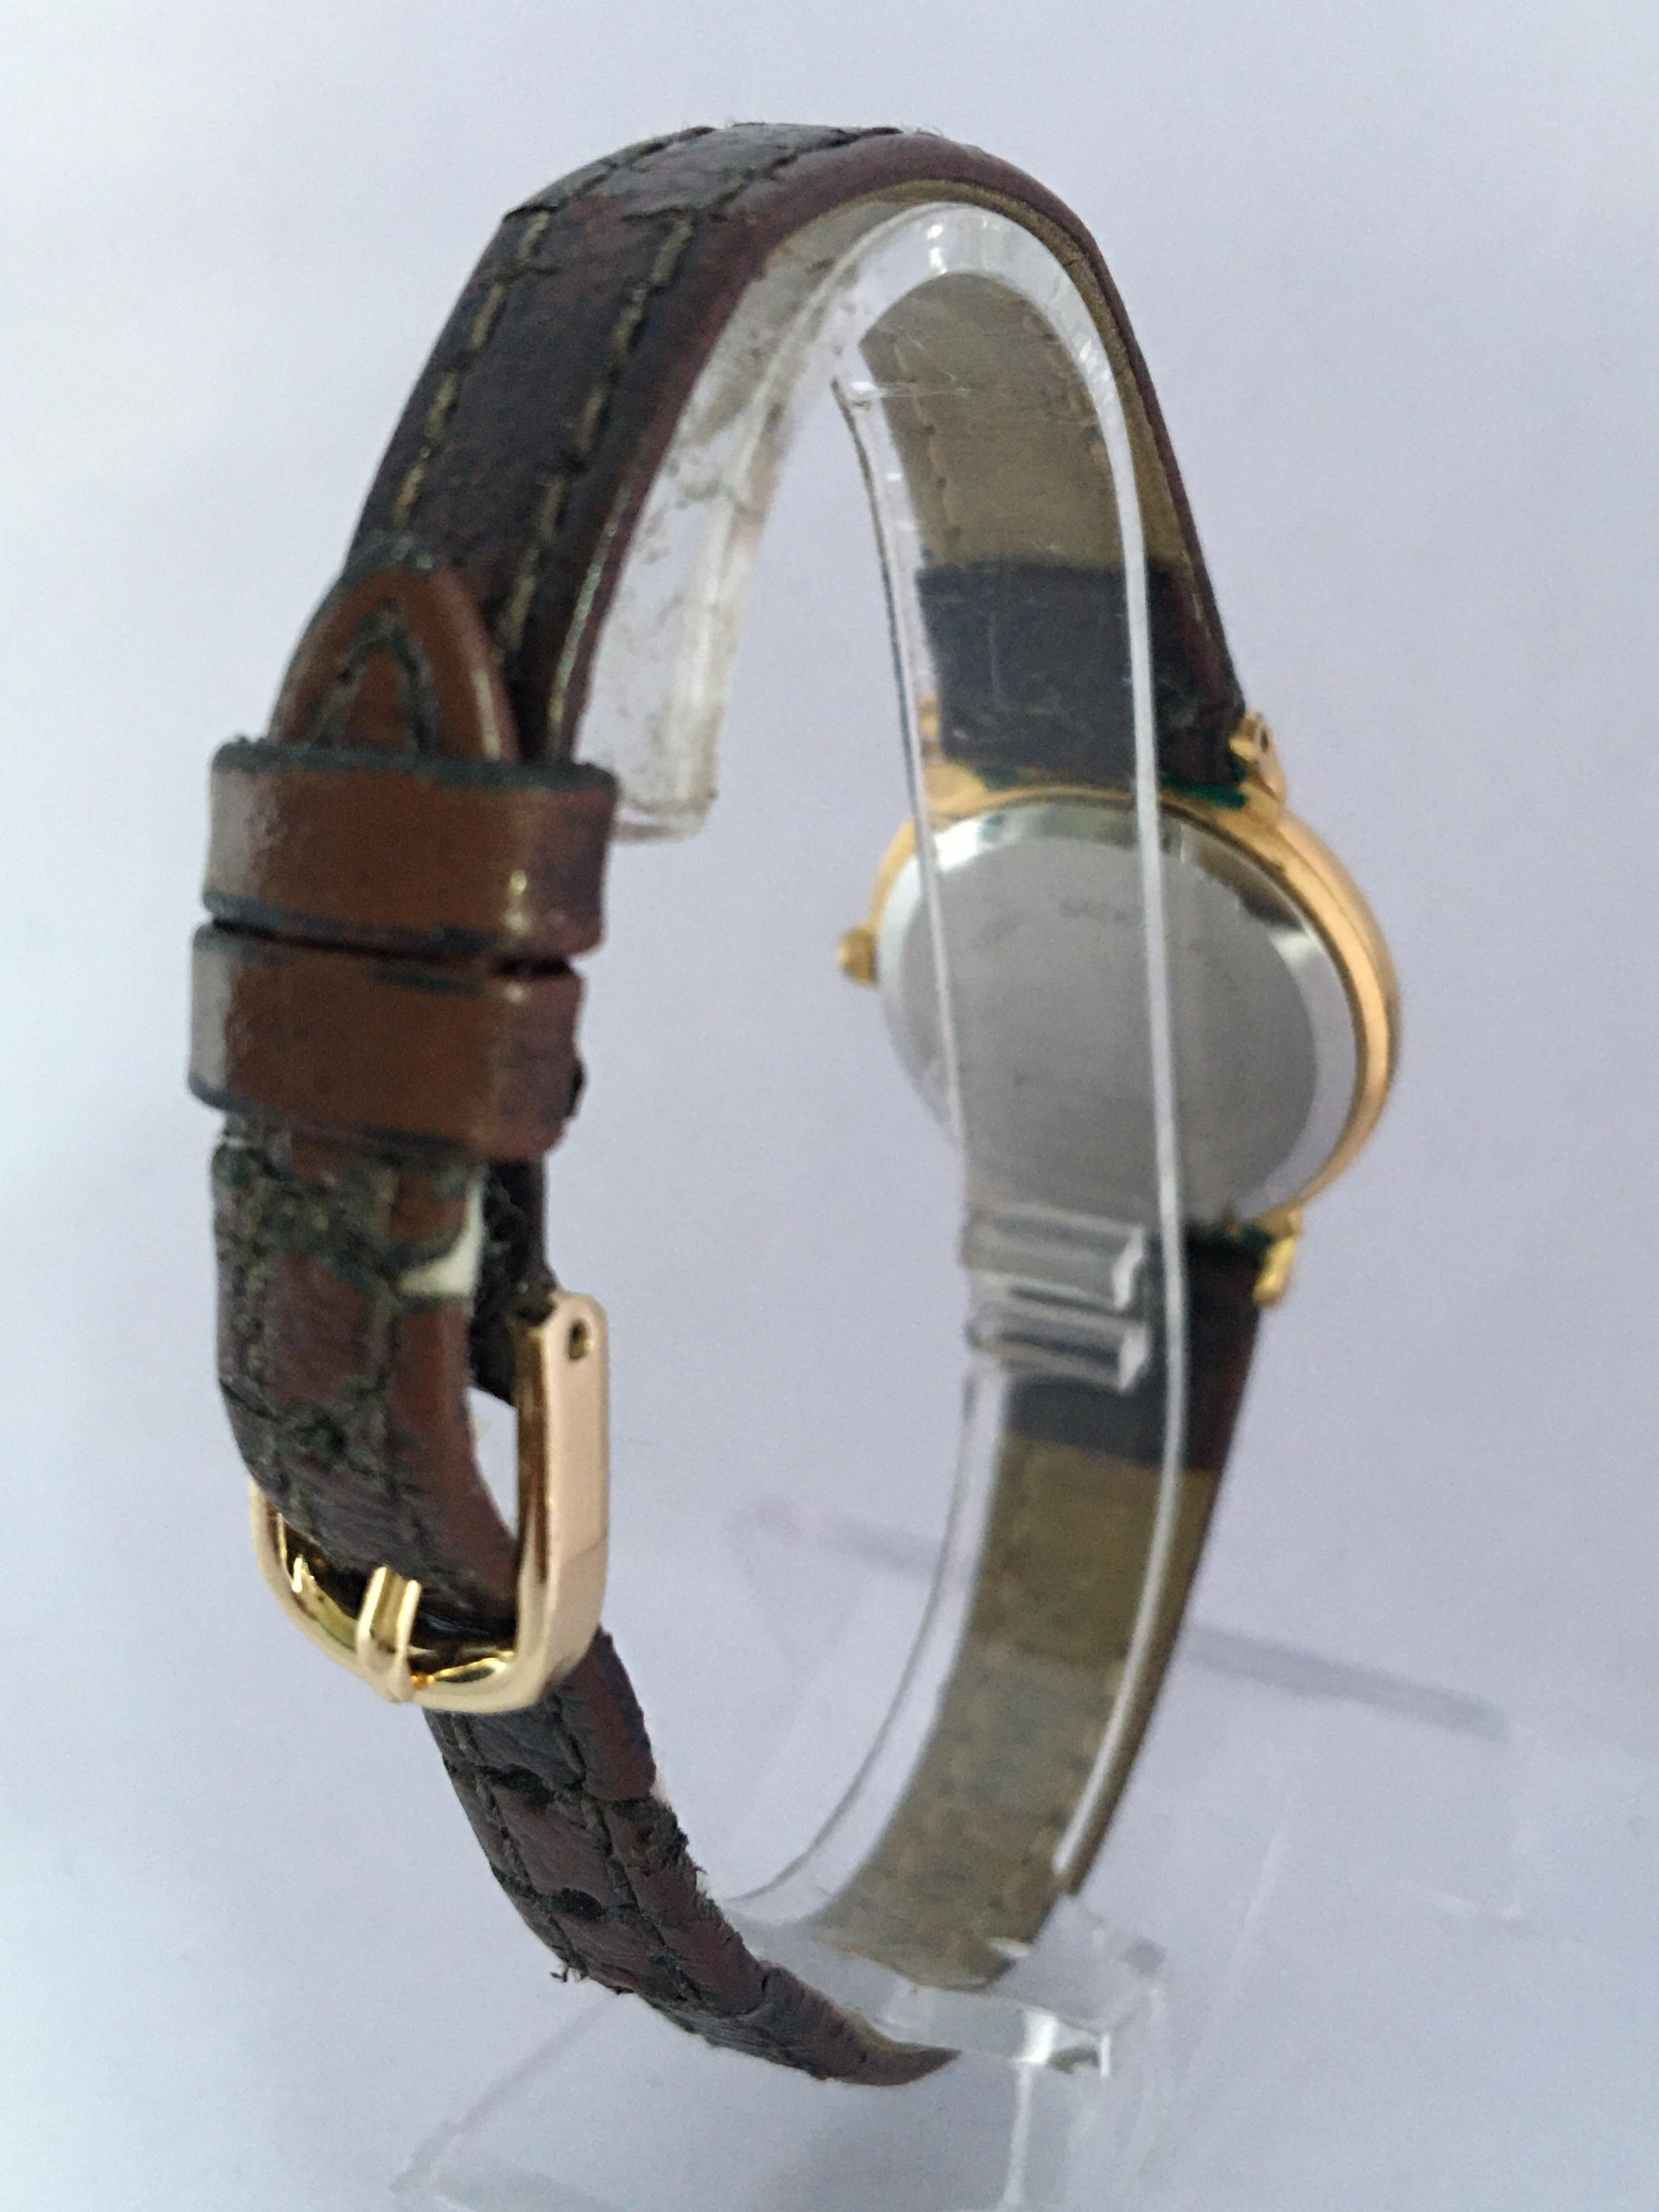 Vintage Gold-Plated and Stainless Steel Back Accurist Quartz Ladies Watch In Good Condition For Sale In Carlisle, GB